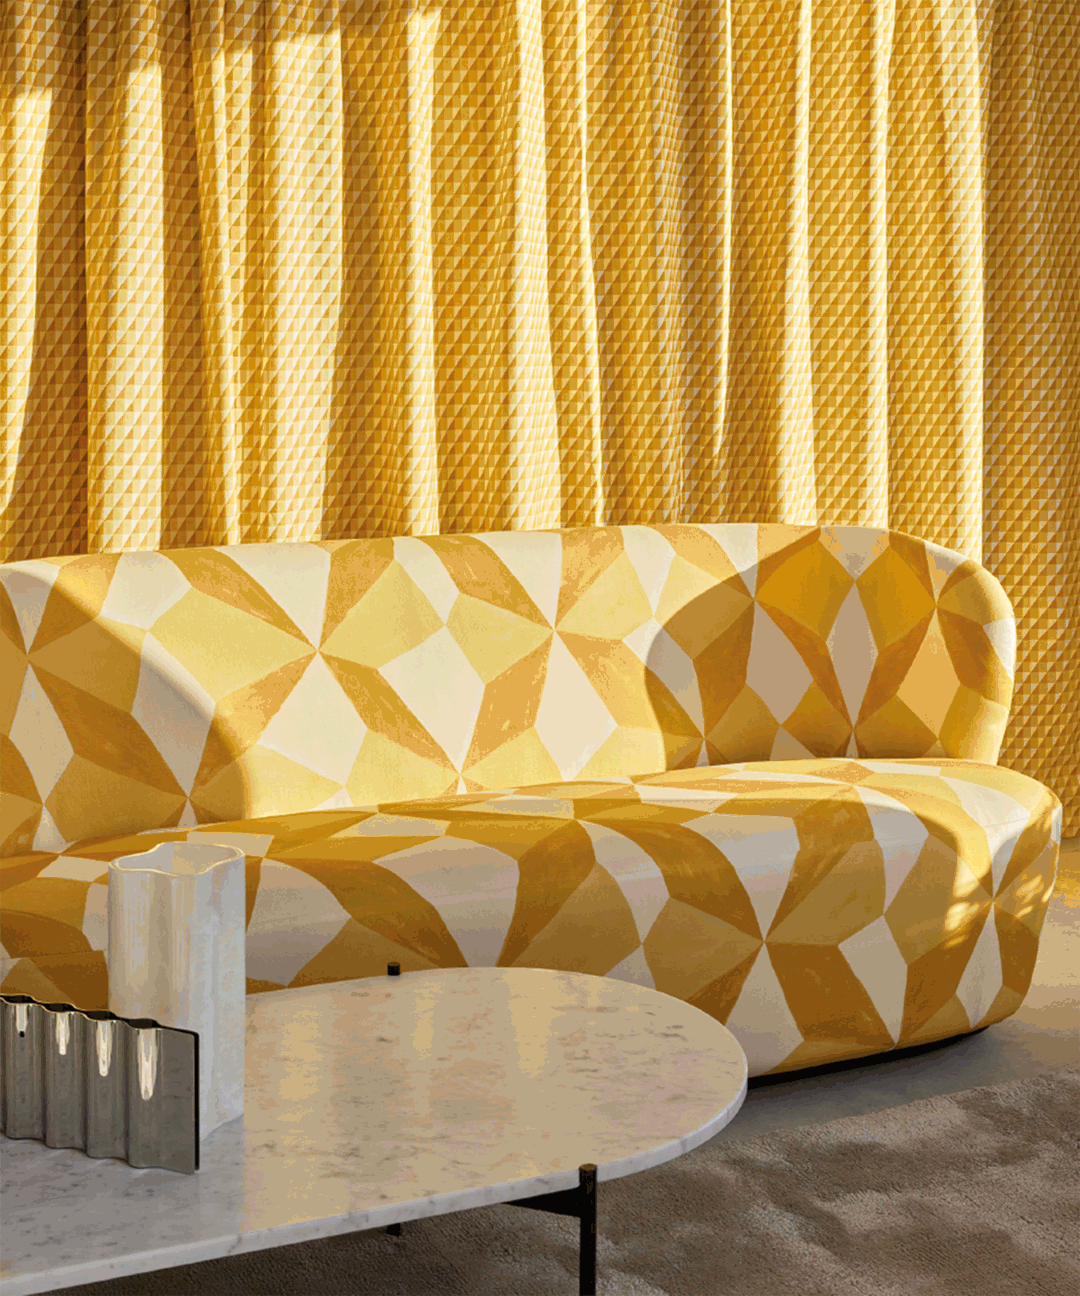 An image showing the new recycled fabric on a sofa with a yellow background and foreground.